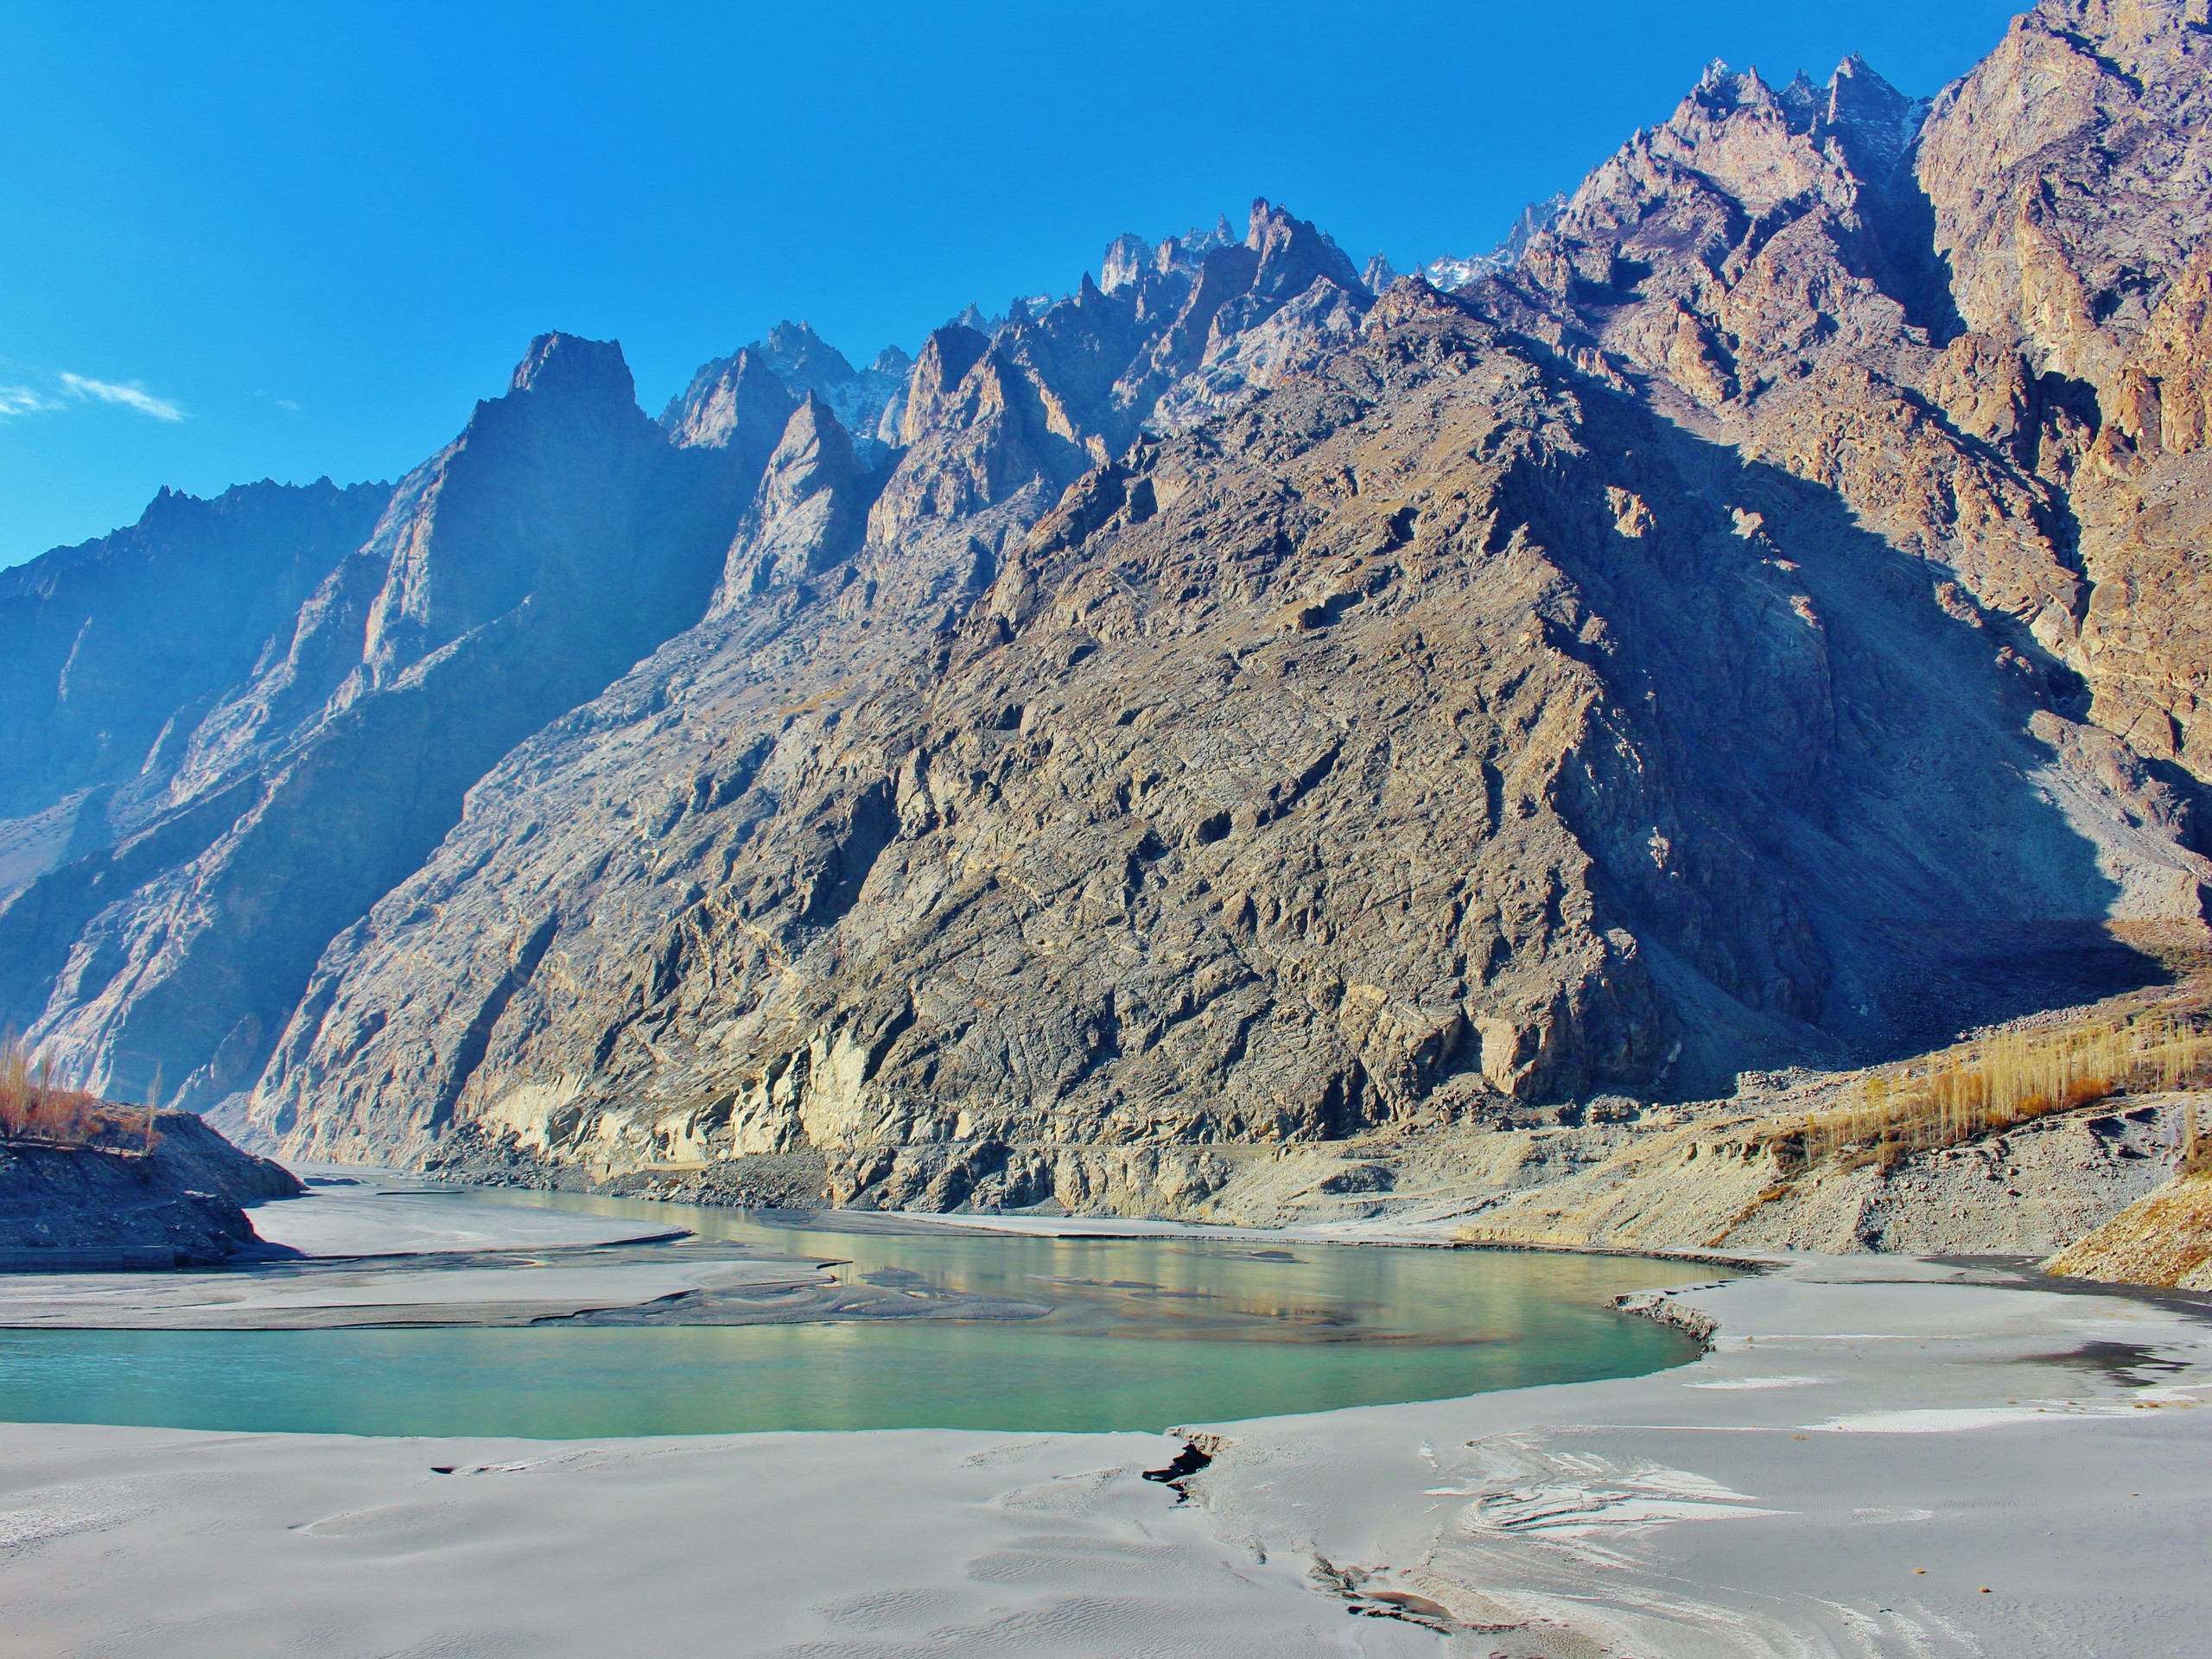 Beautiful river in Hunza Valley seen while on an overland tour